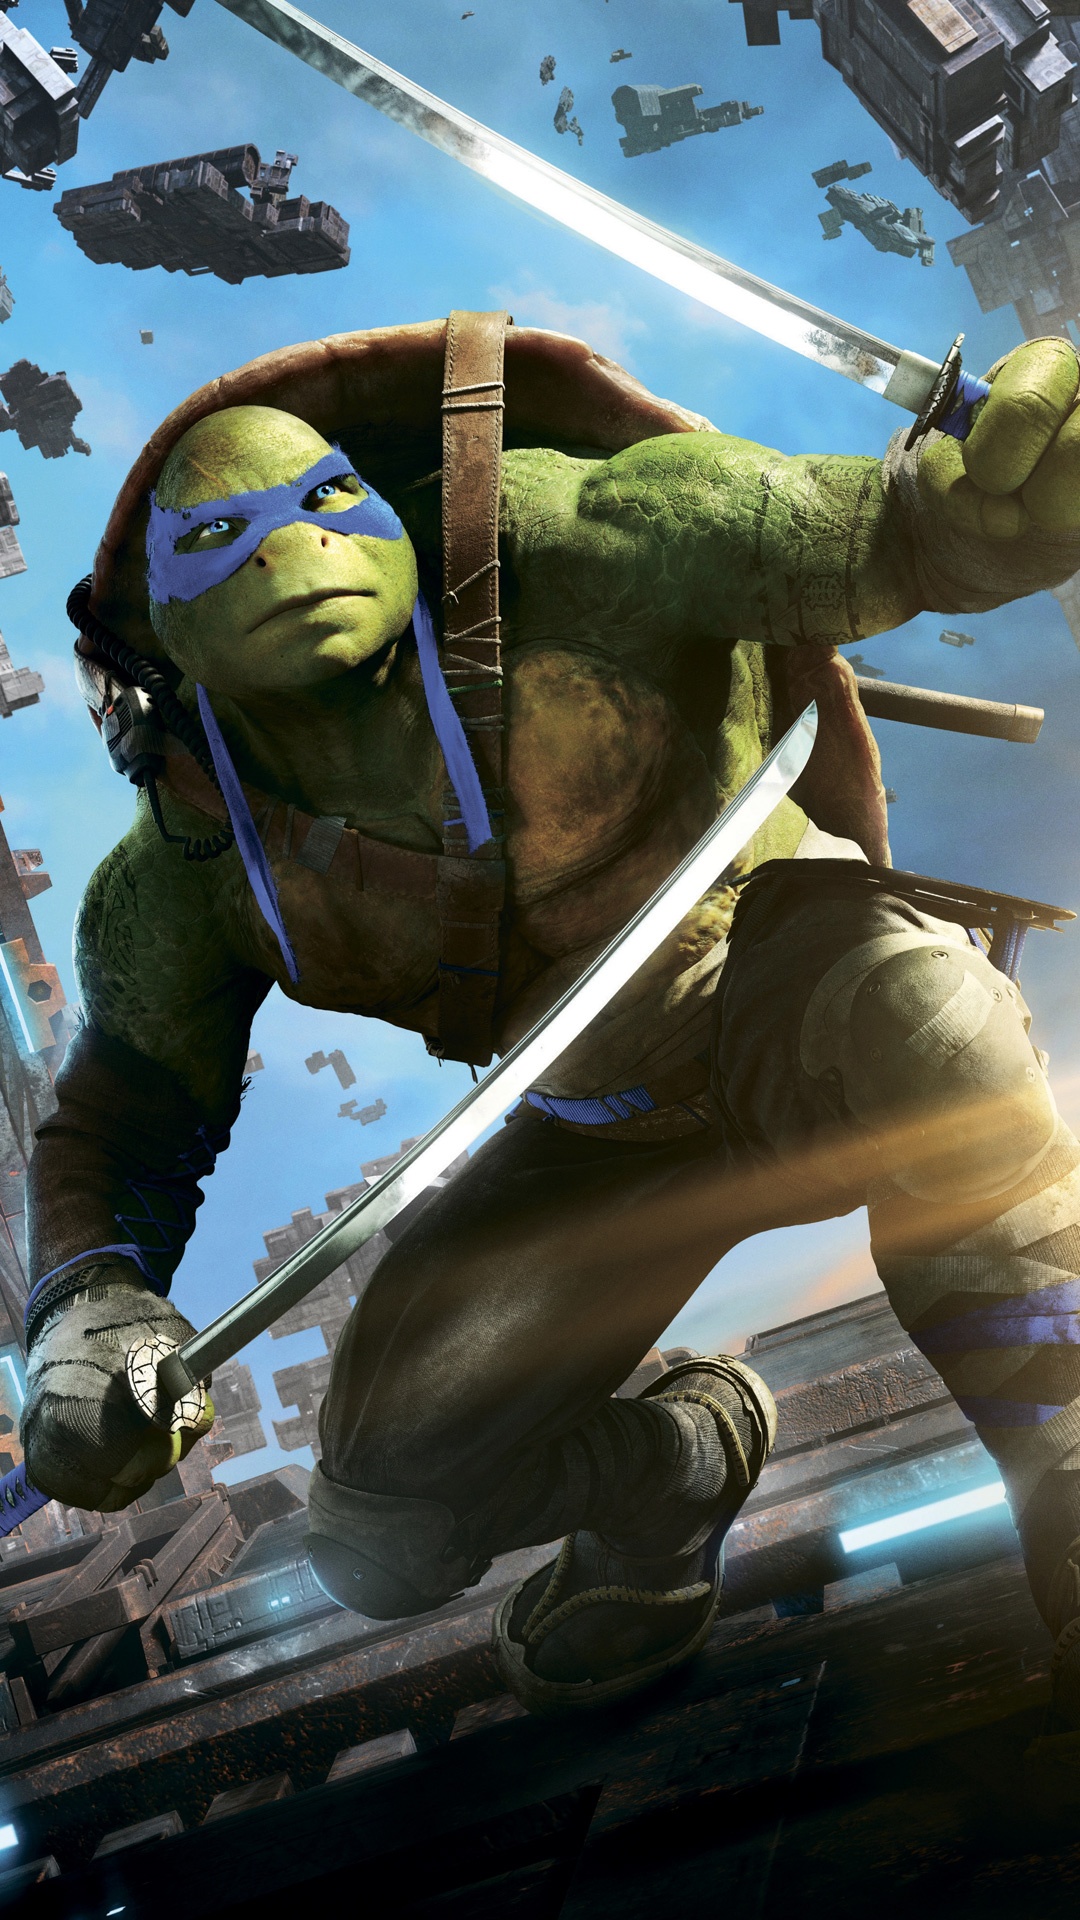 Leonardo TMNT Out of the Shadows Wallpaper in jpg format for free download